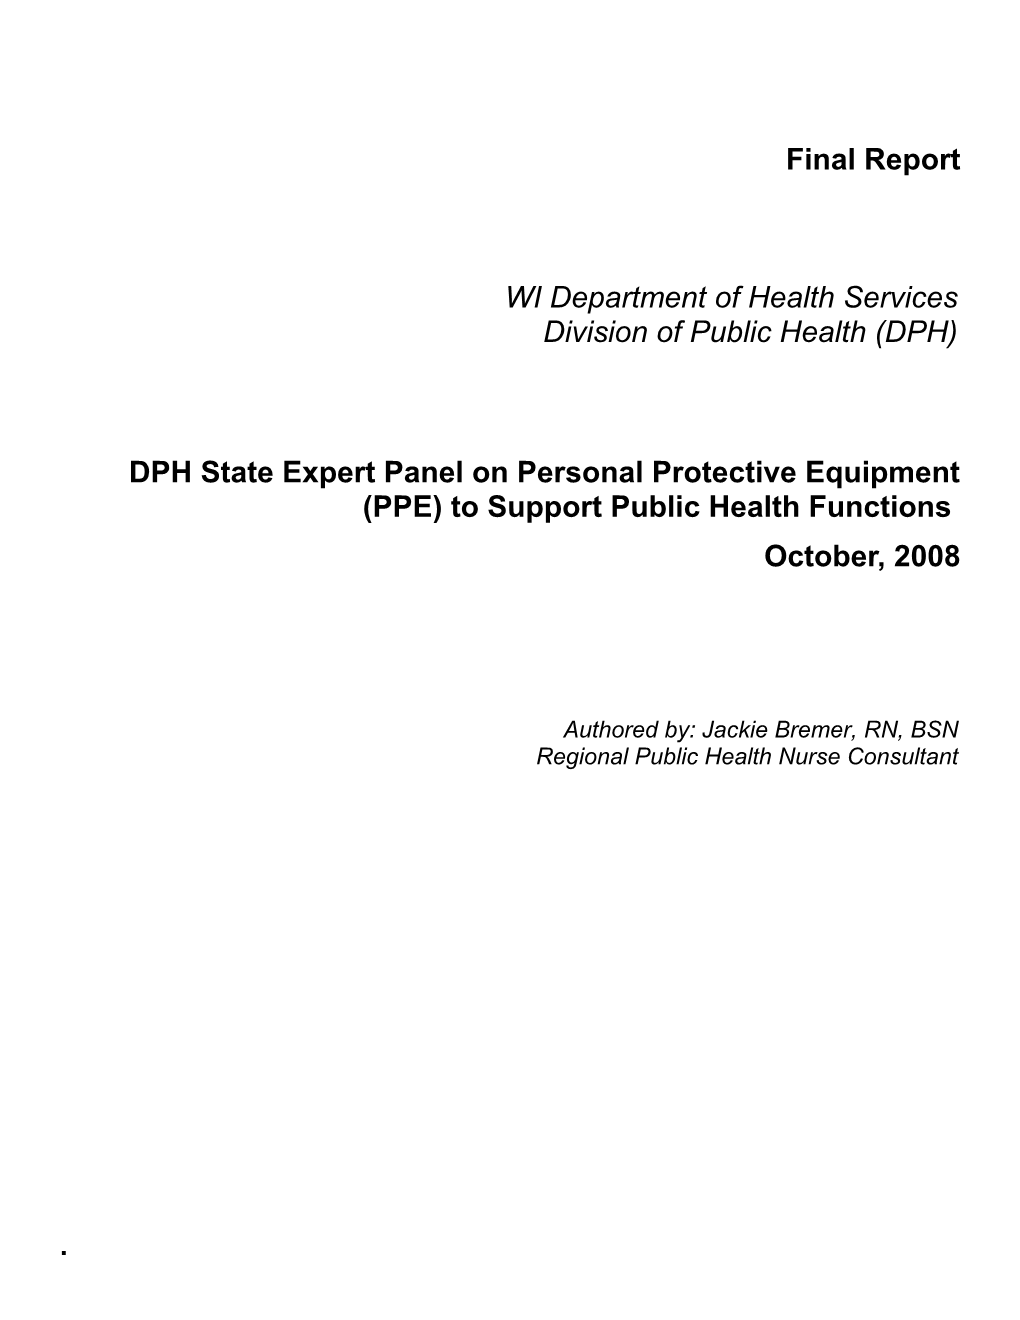 DHS/DPH State Expert Panel on PPE